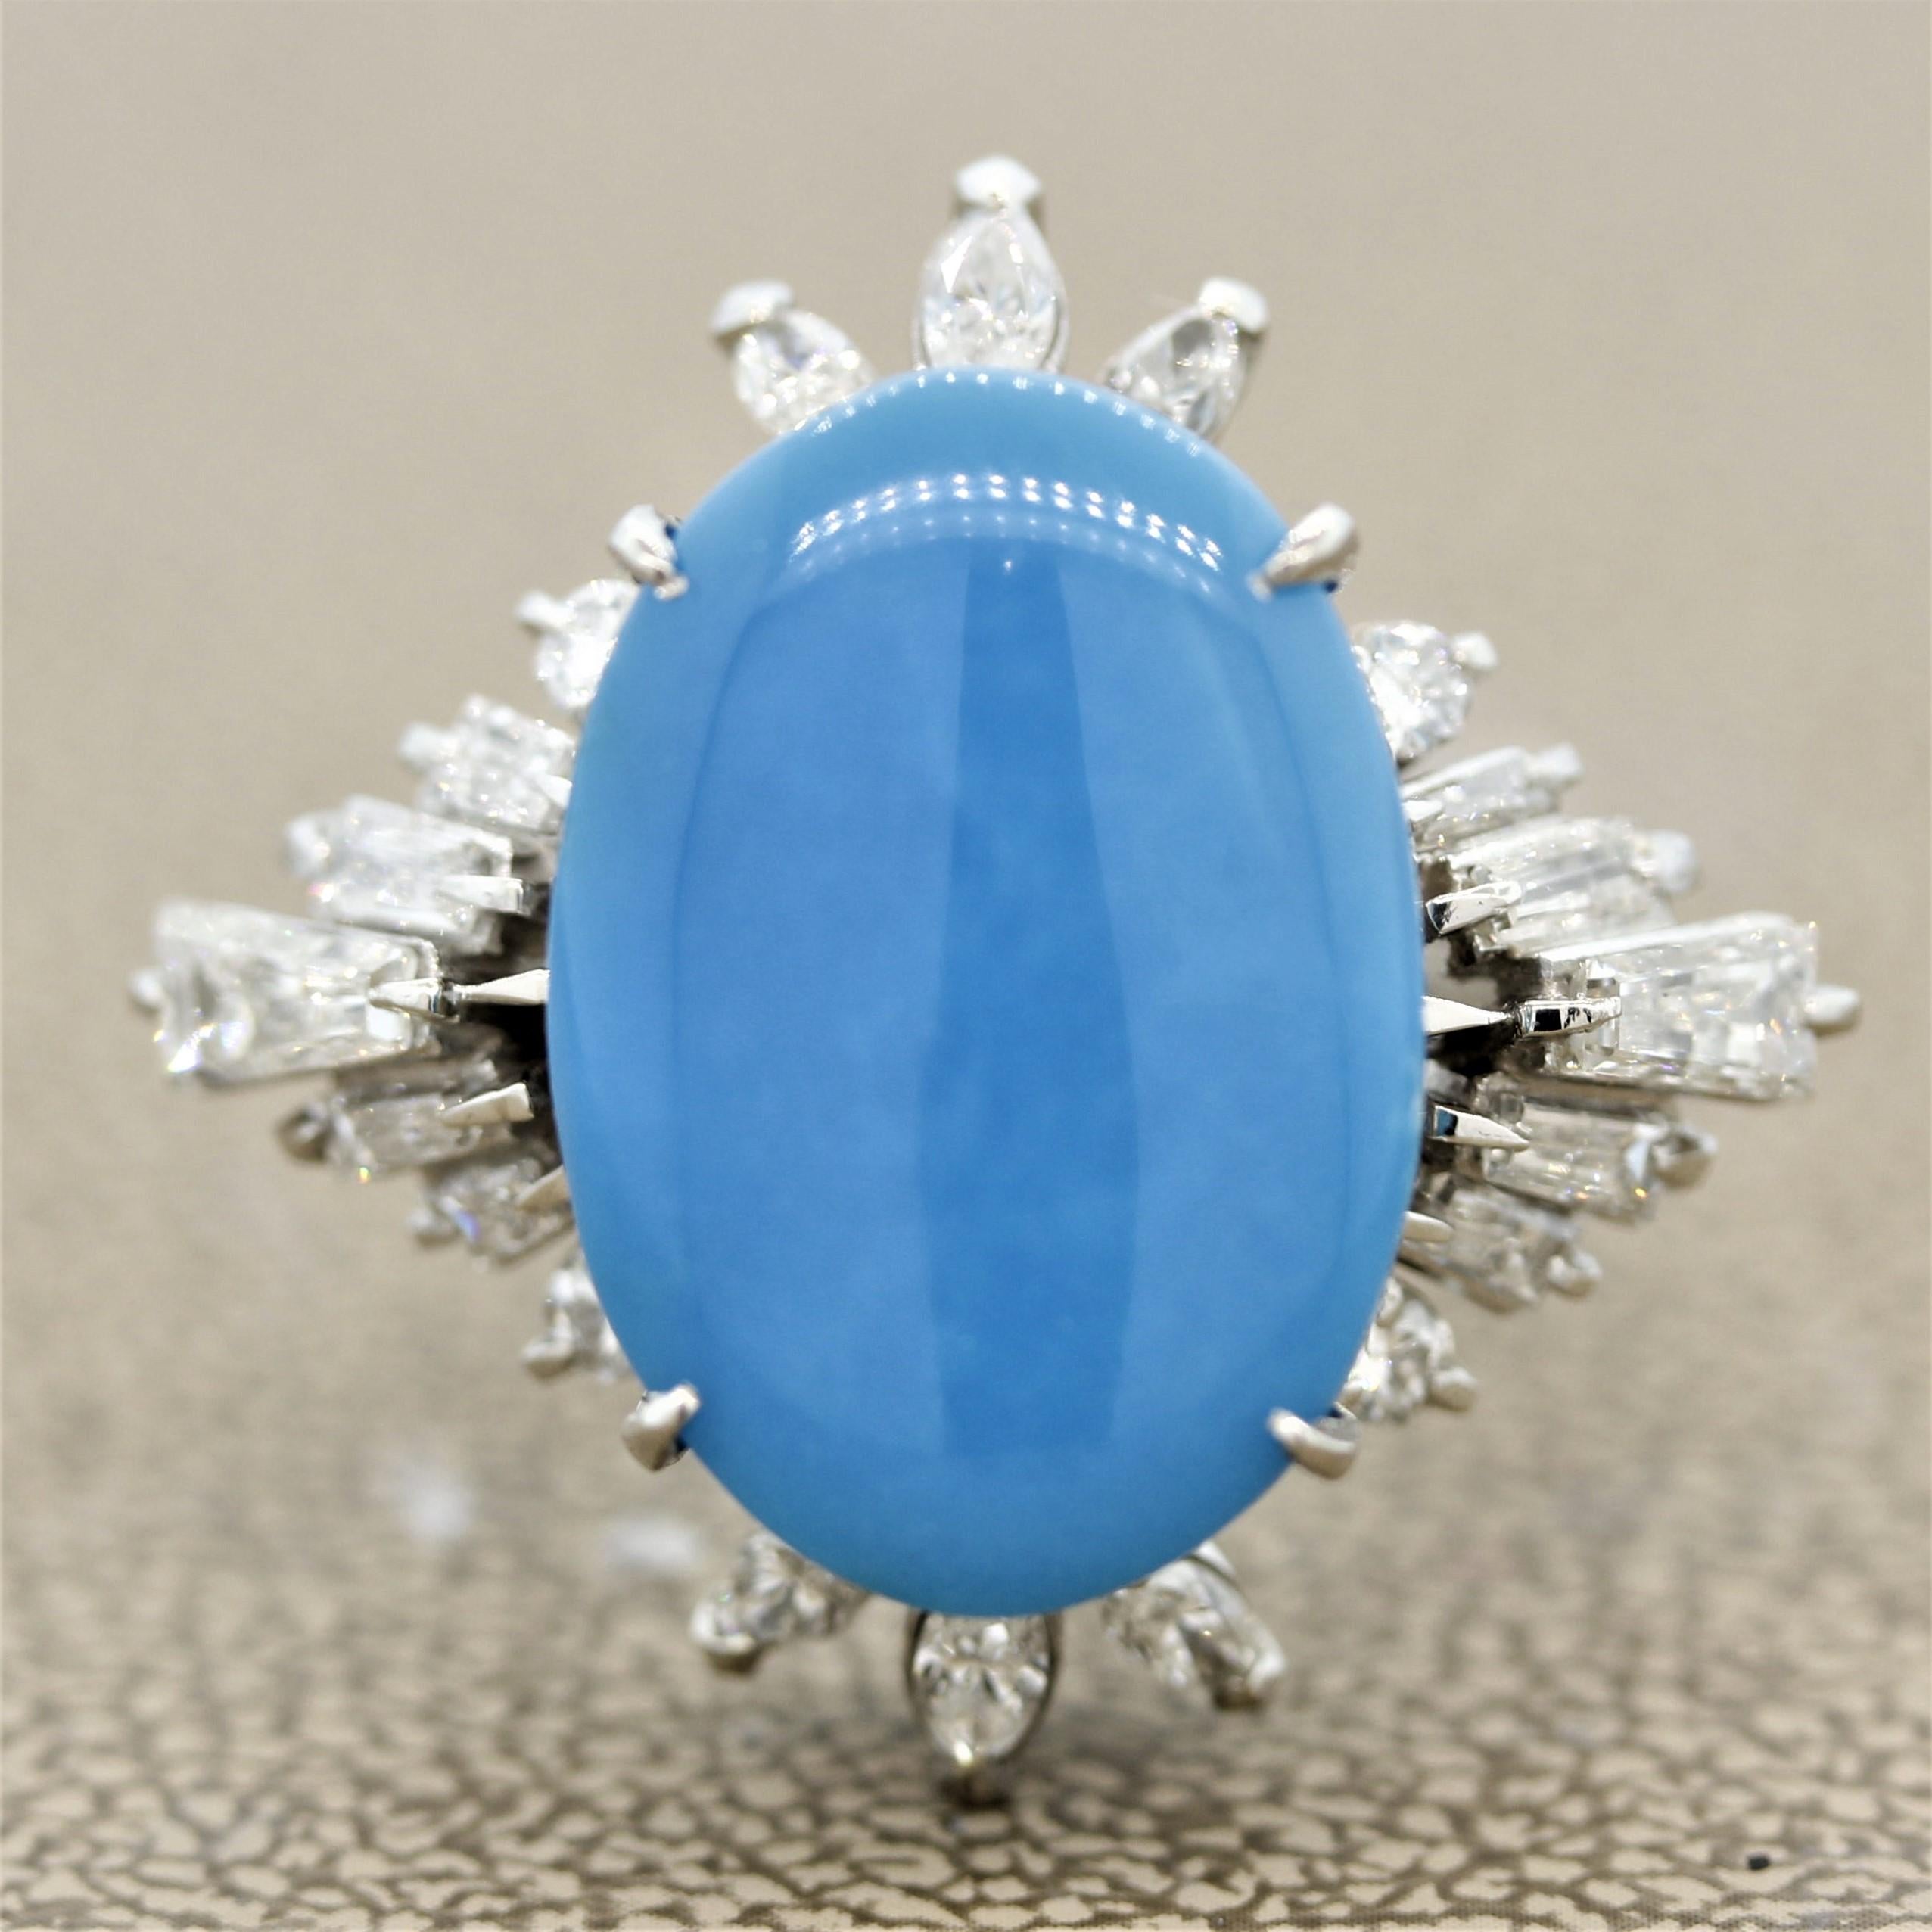 A large and impressive cocktail ring featuring a 8.36 carat turquoise. It has a rich beautiful sky-blue color which gives us the impression of its Persian origin. It is accented by 1.21 carats of round brilliant, marquise and tapered baguette cut